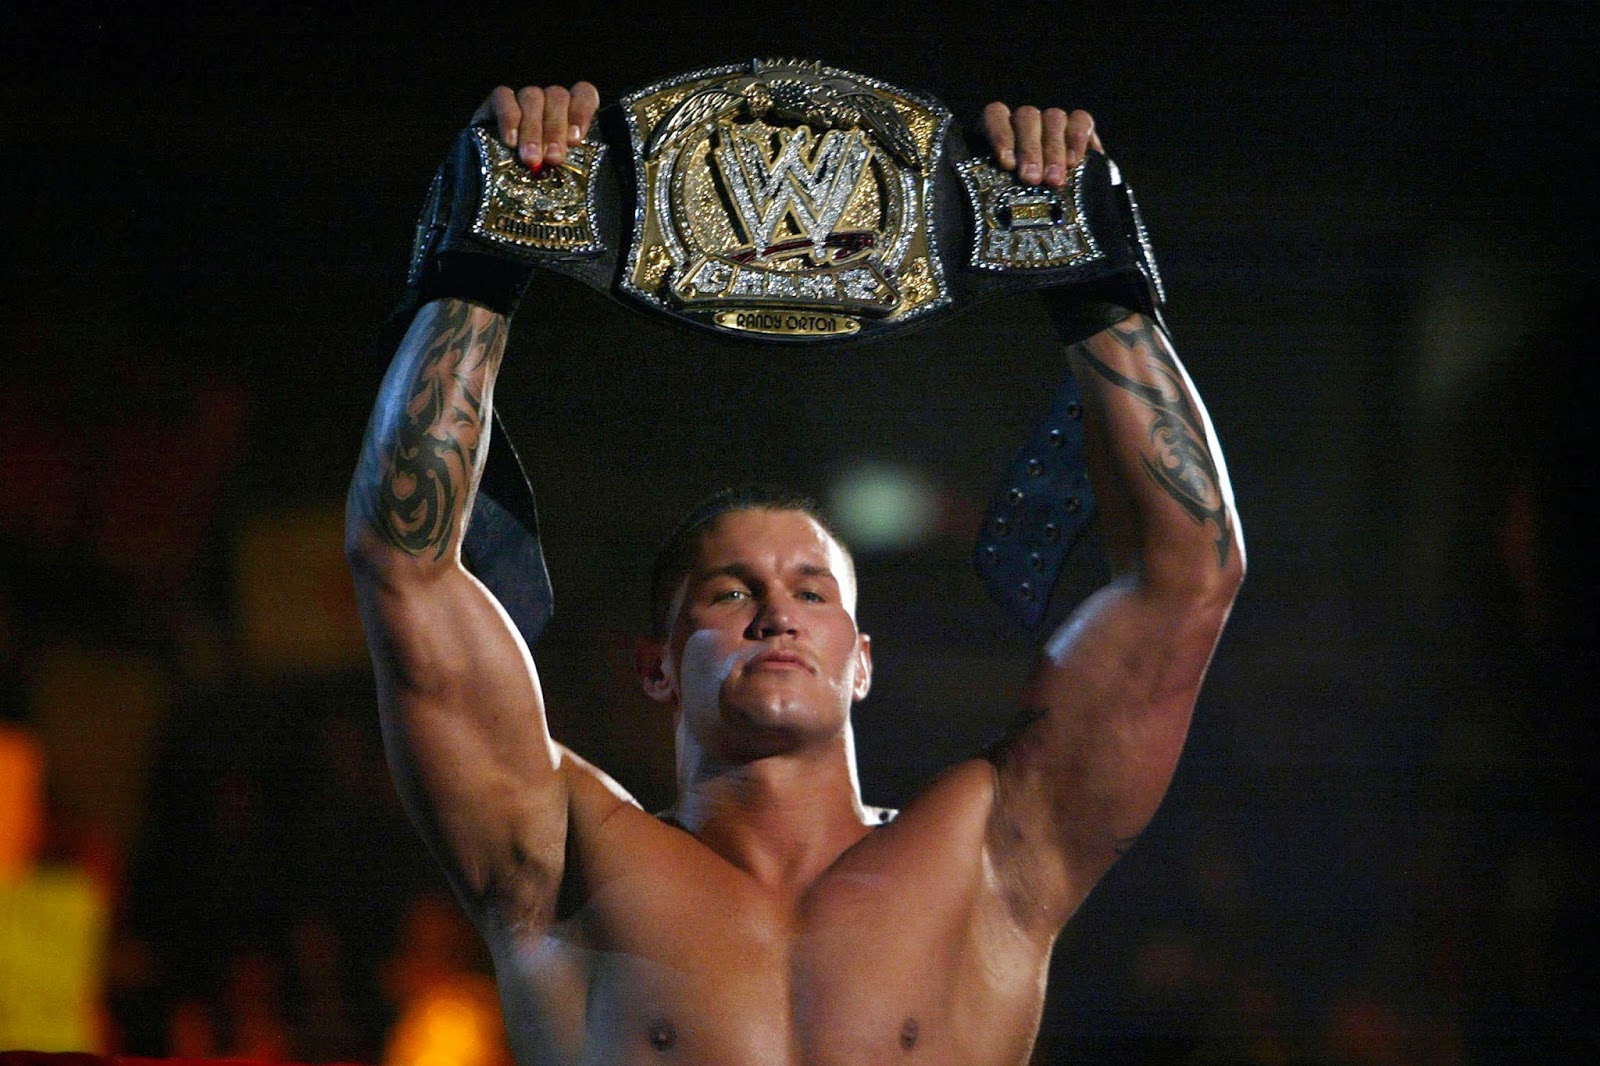 Randy Orton Exclusive New Hd Wallpapers - Wwe Champion Randy Orton 2007 , HD Wallpaper & Backgrounds